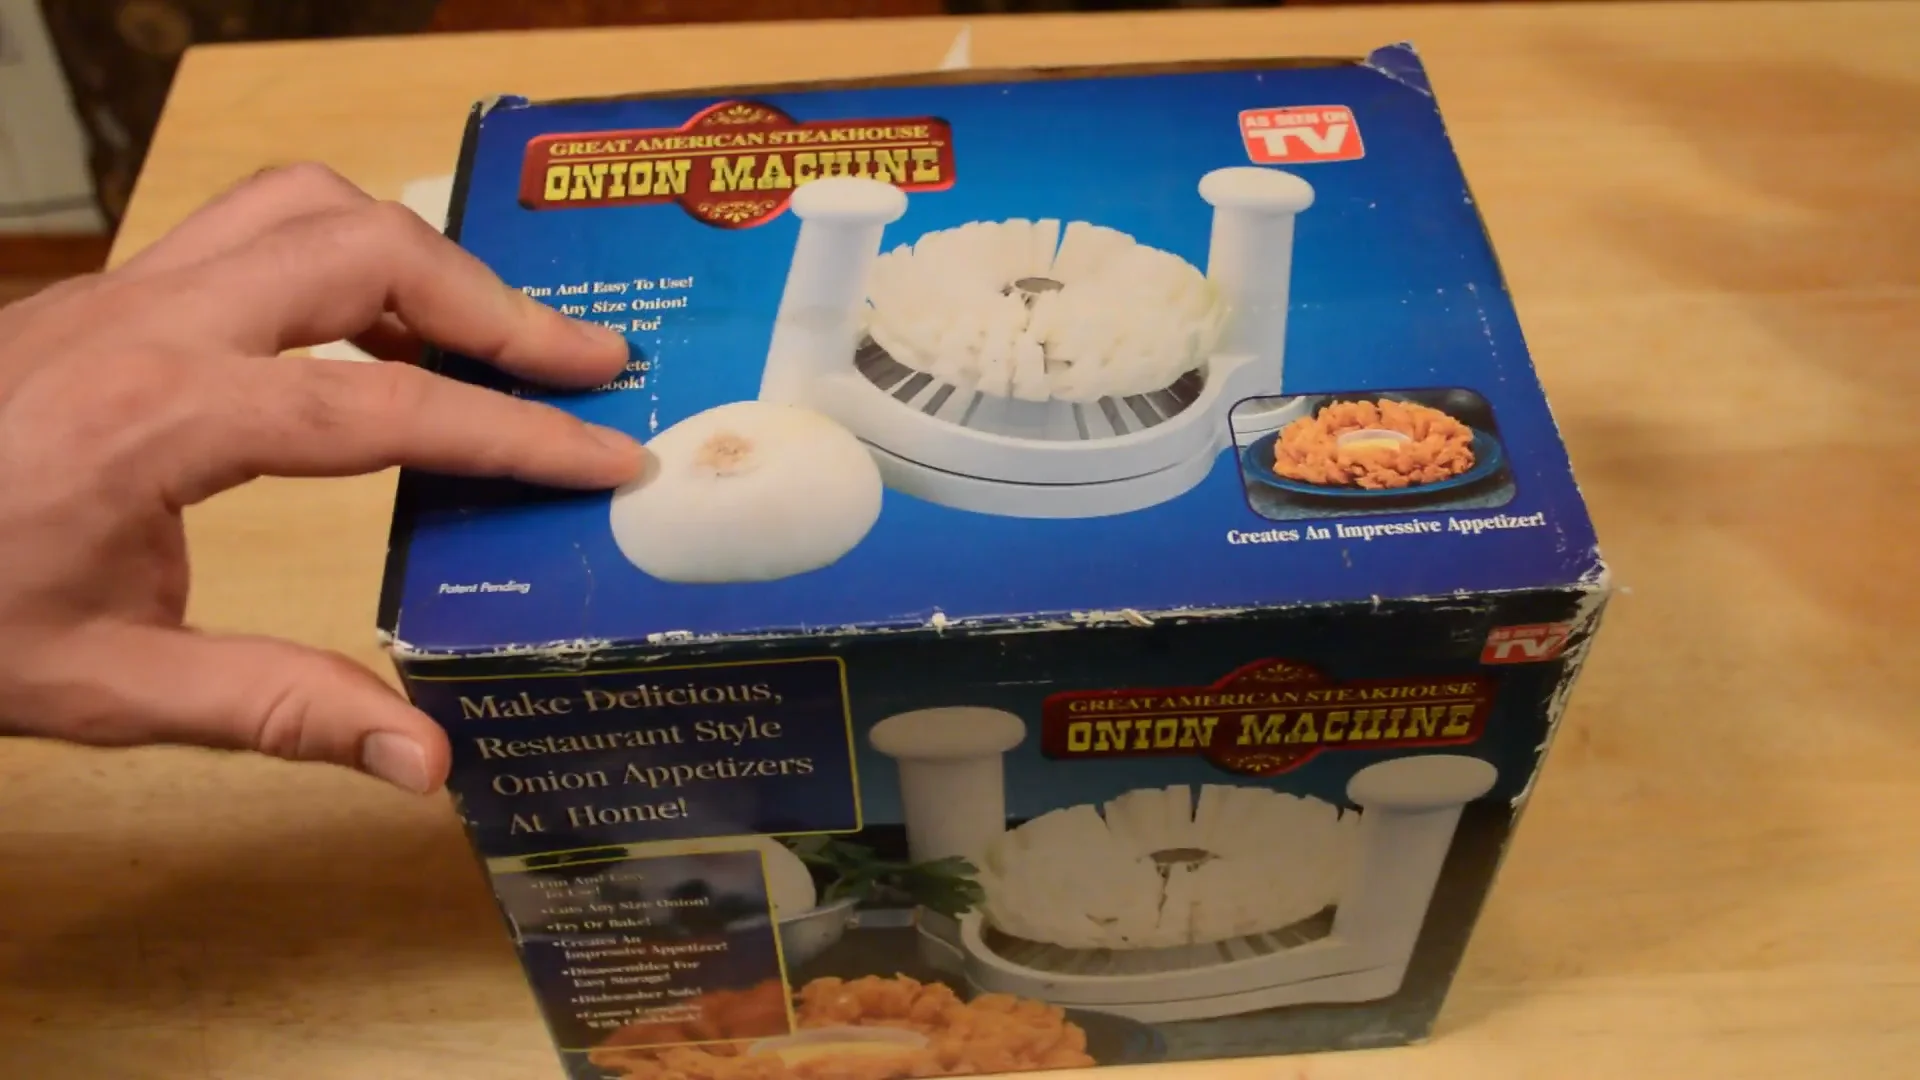 New Great American Steakhouse Blooming Onion Machine As Seen On TV